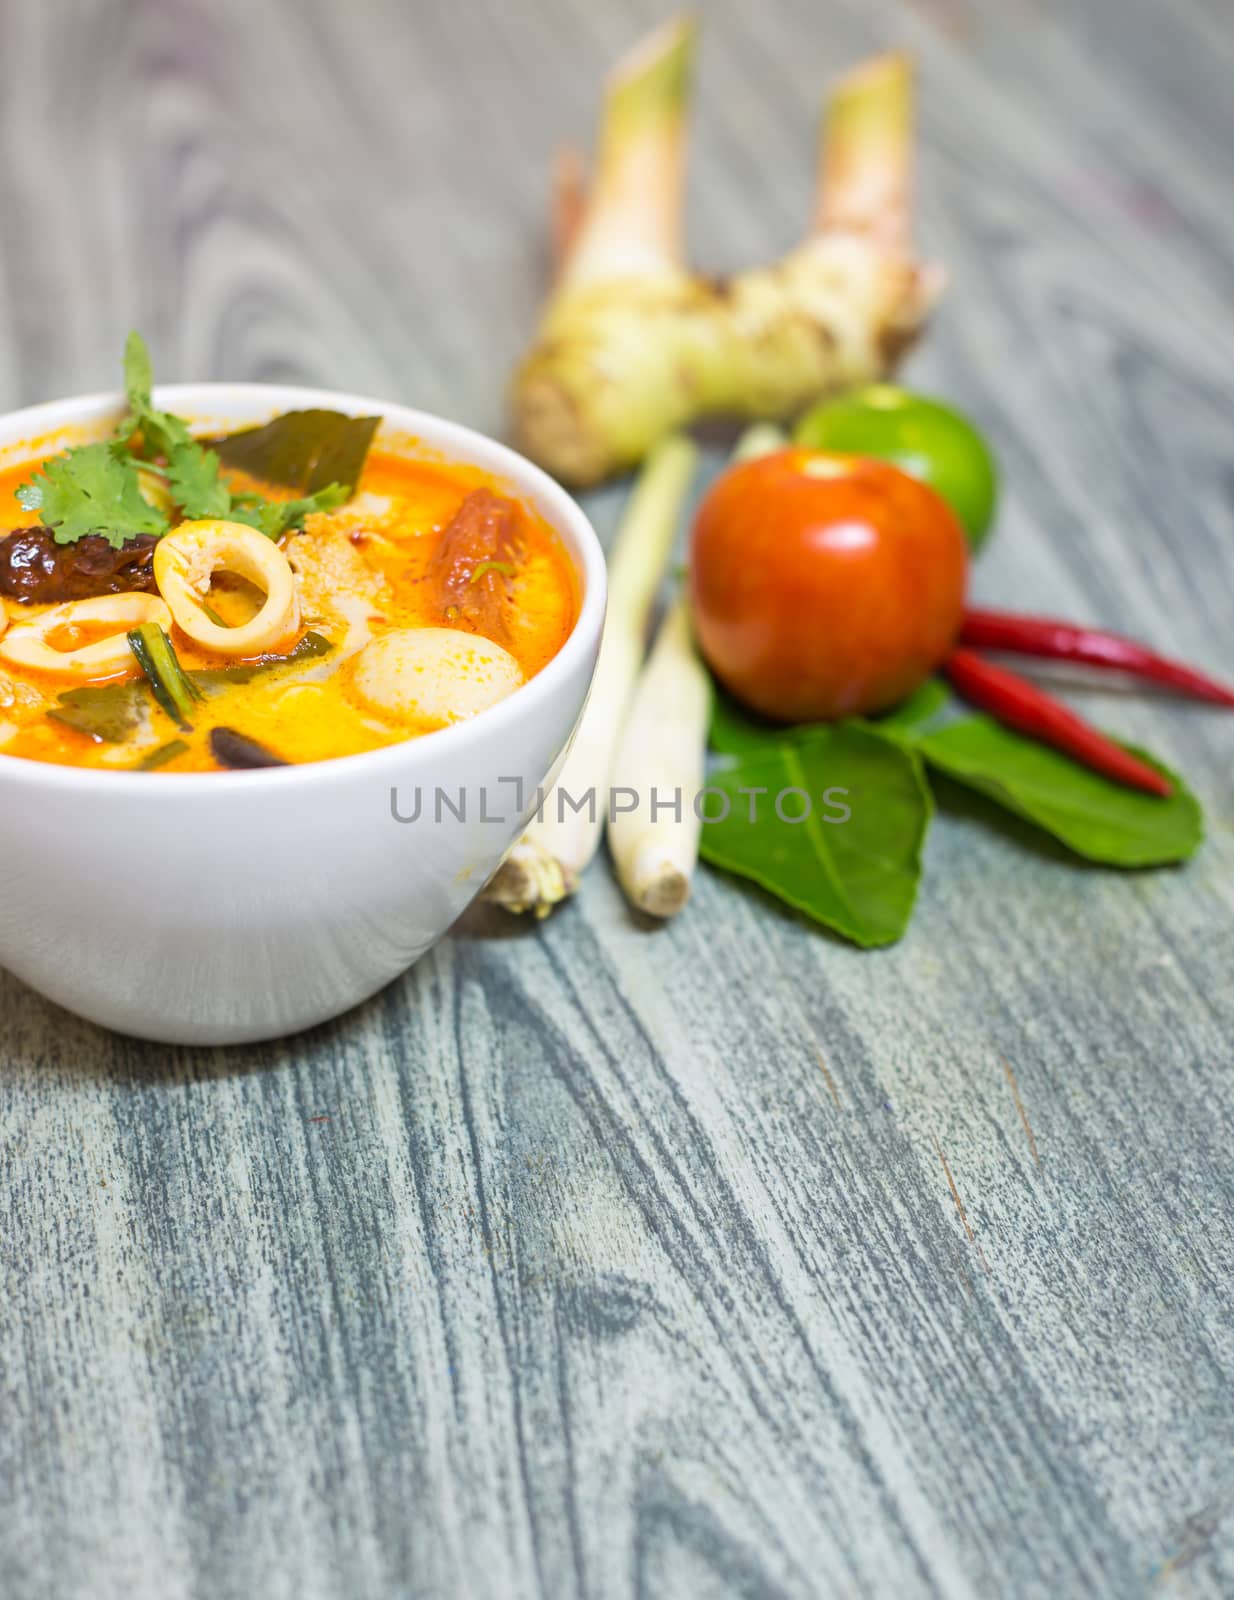 Closeup Tom Yum Kung-Thai spicy soup with Herb set of Tom Yum Soup Ingredients on wood background